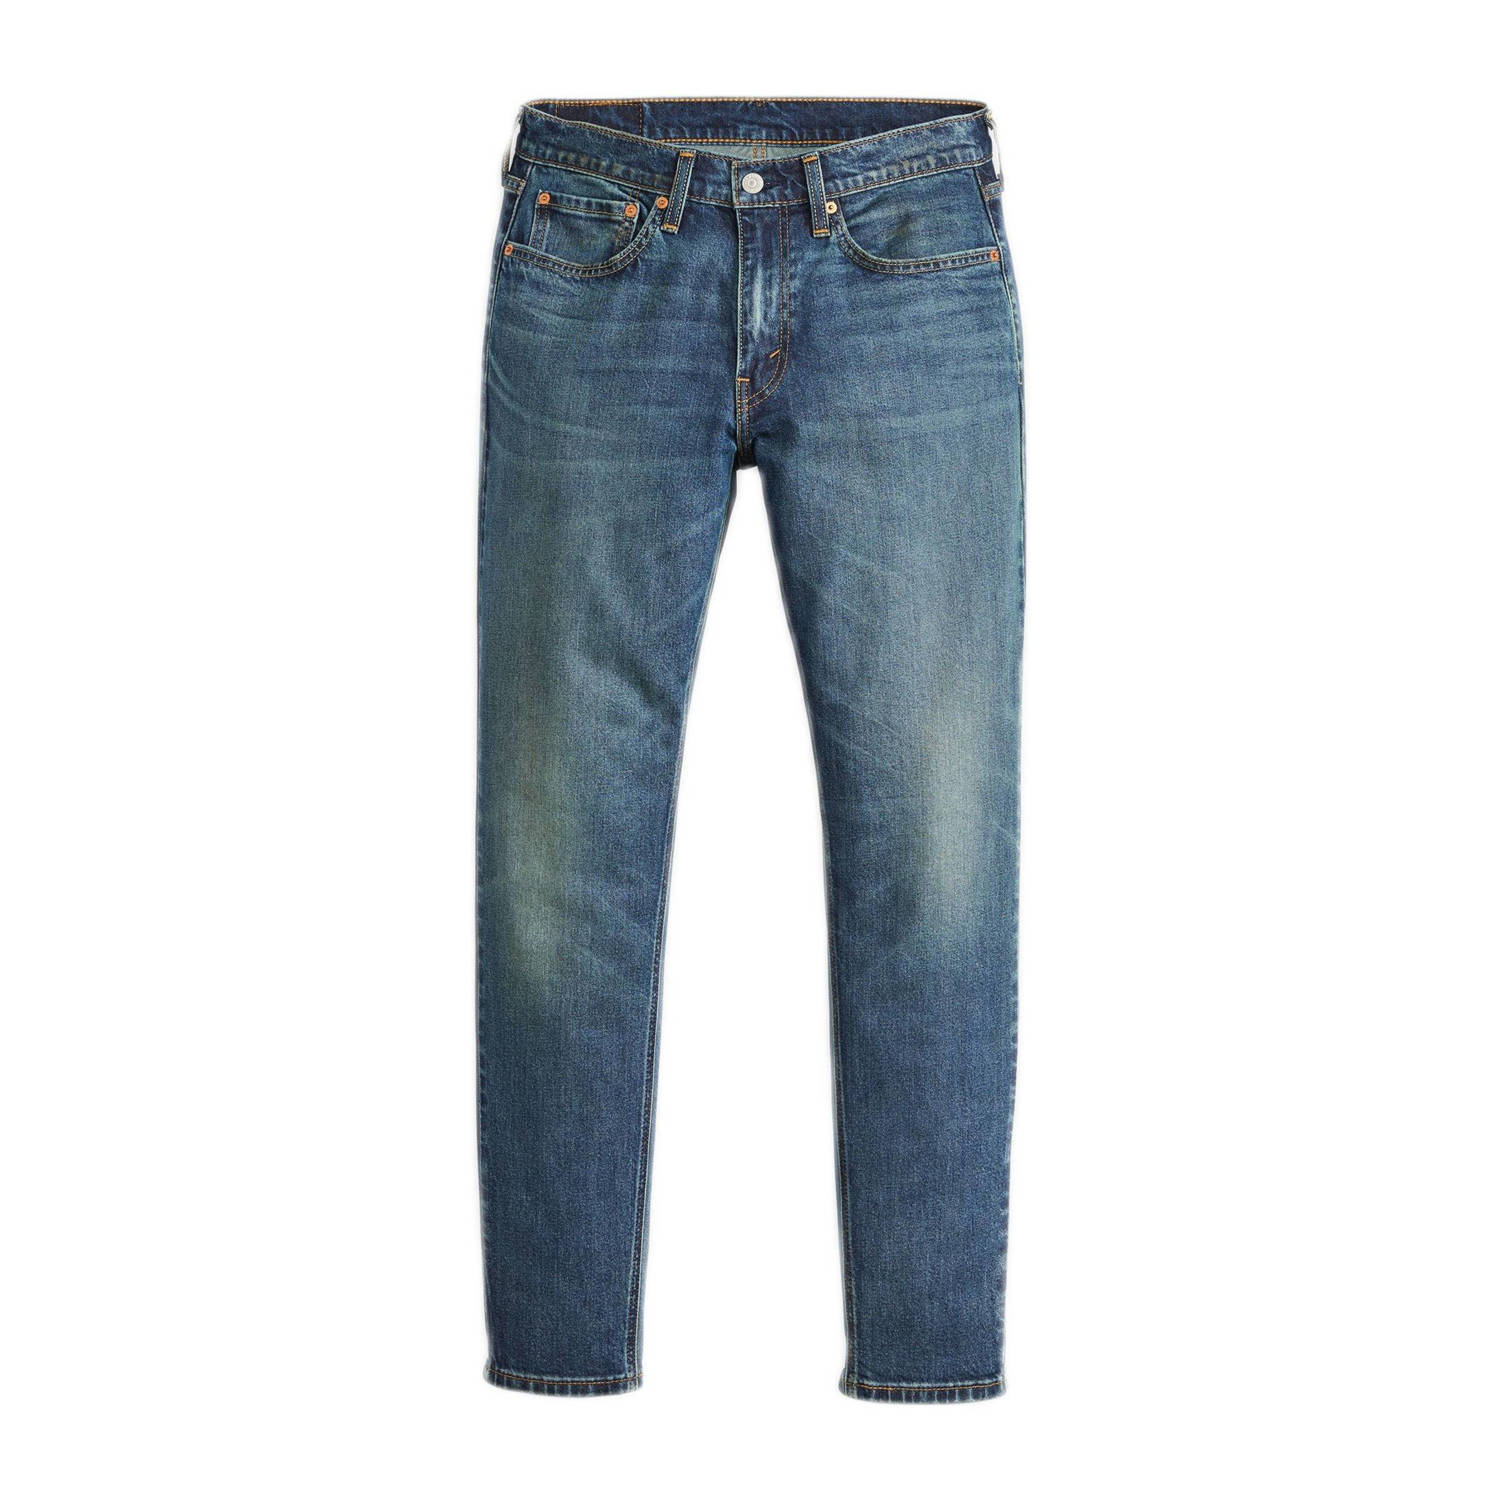 Levi's 531 tapered fit jeans